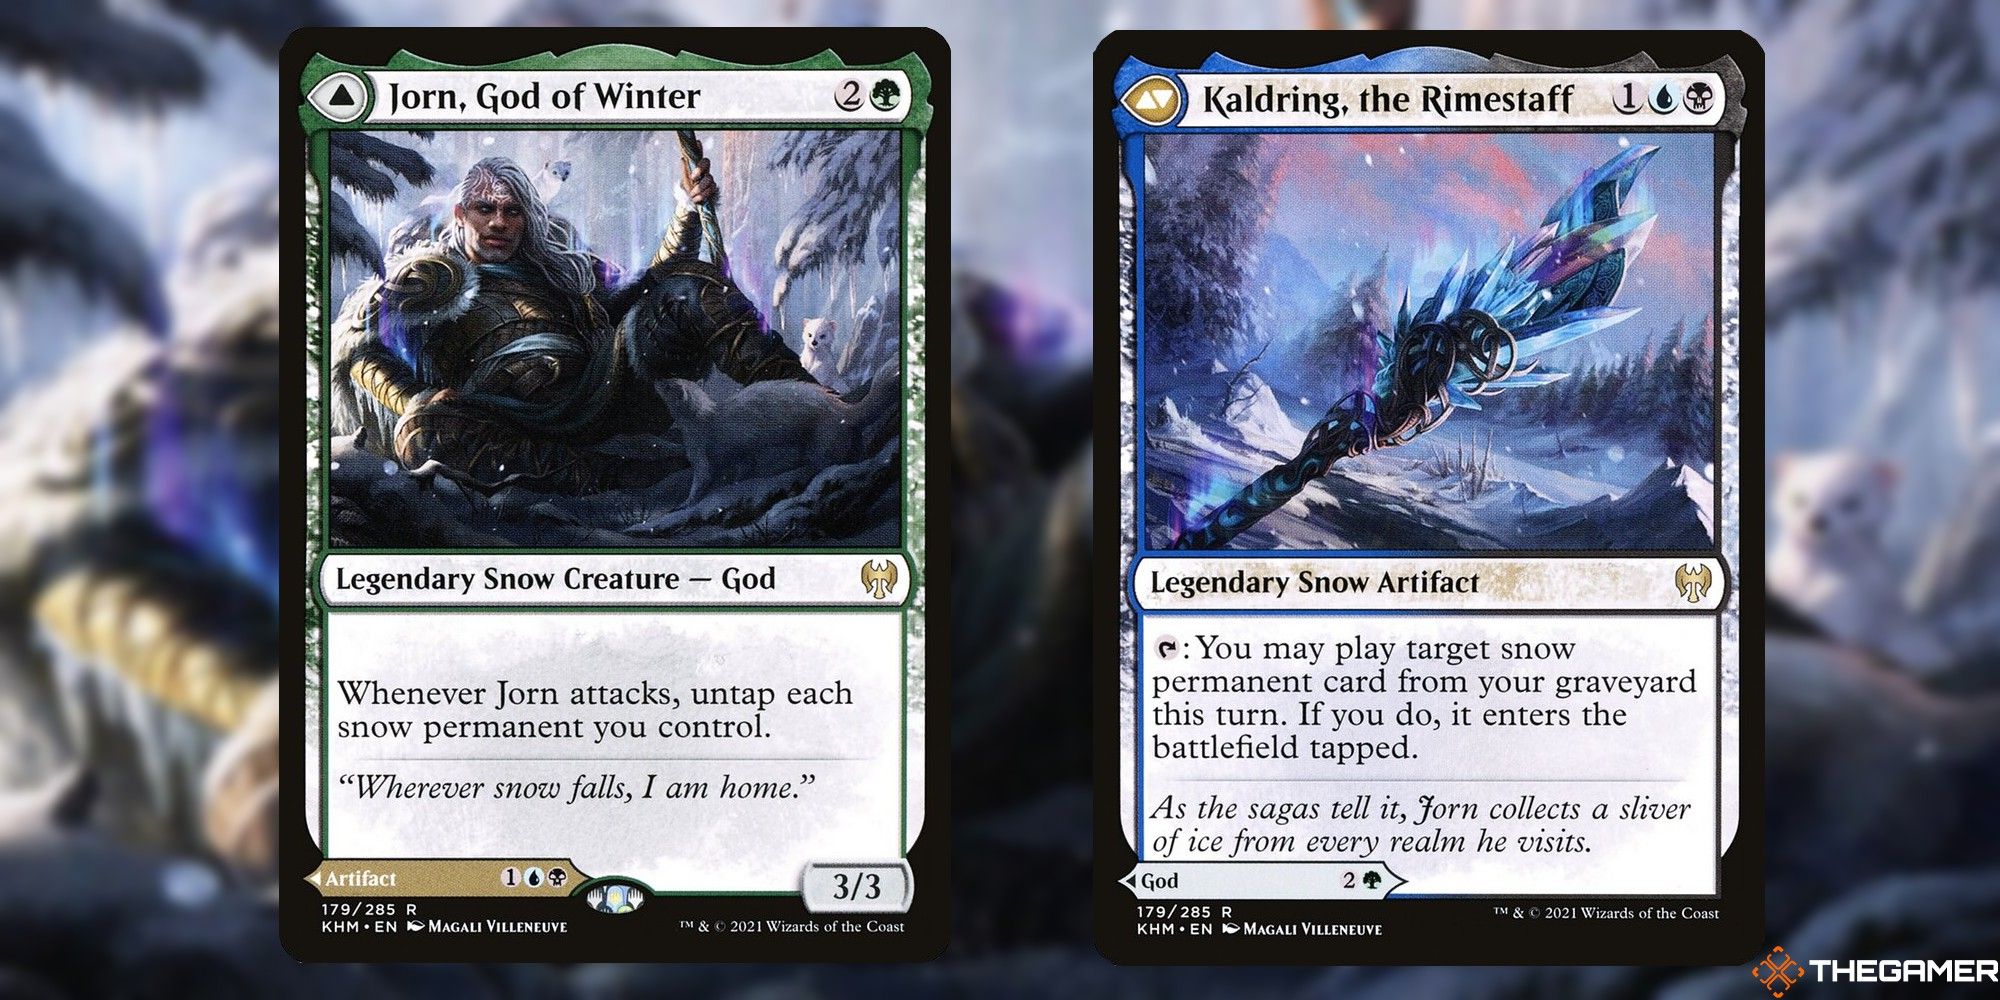 Image of the jorn, god of winter and Kaldring, the Rimestaff card in Magic: The Gathering, with art by Magali Villeneuve